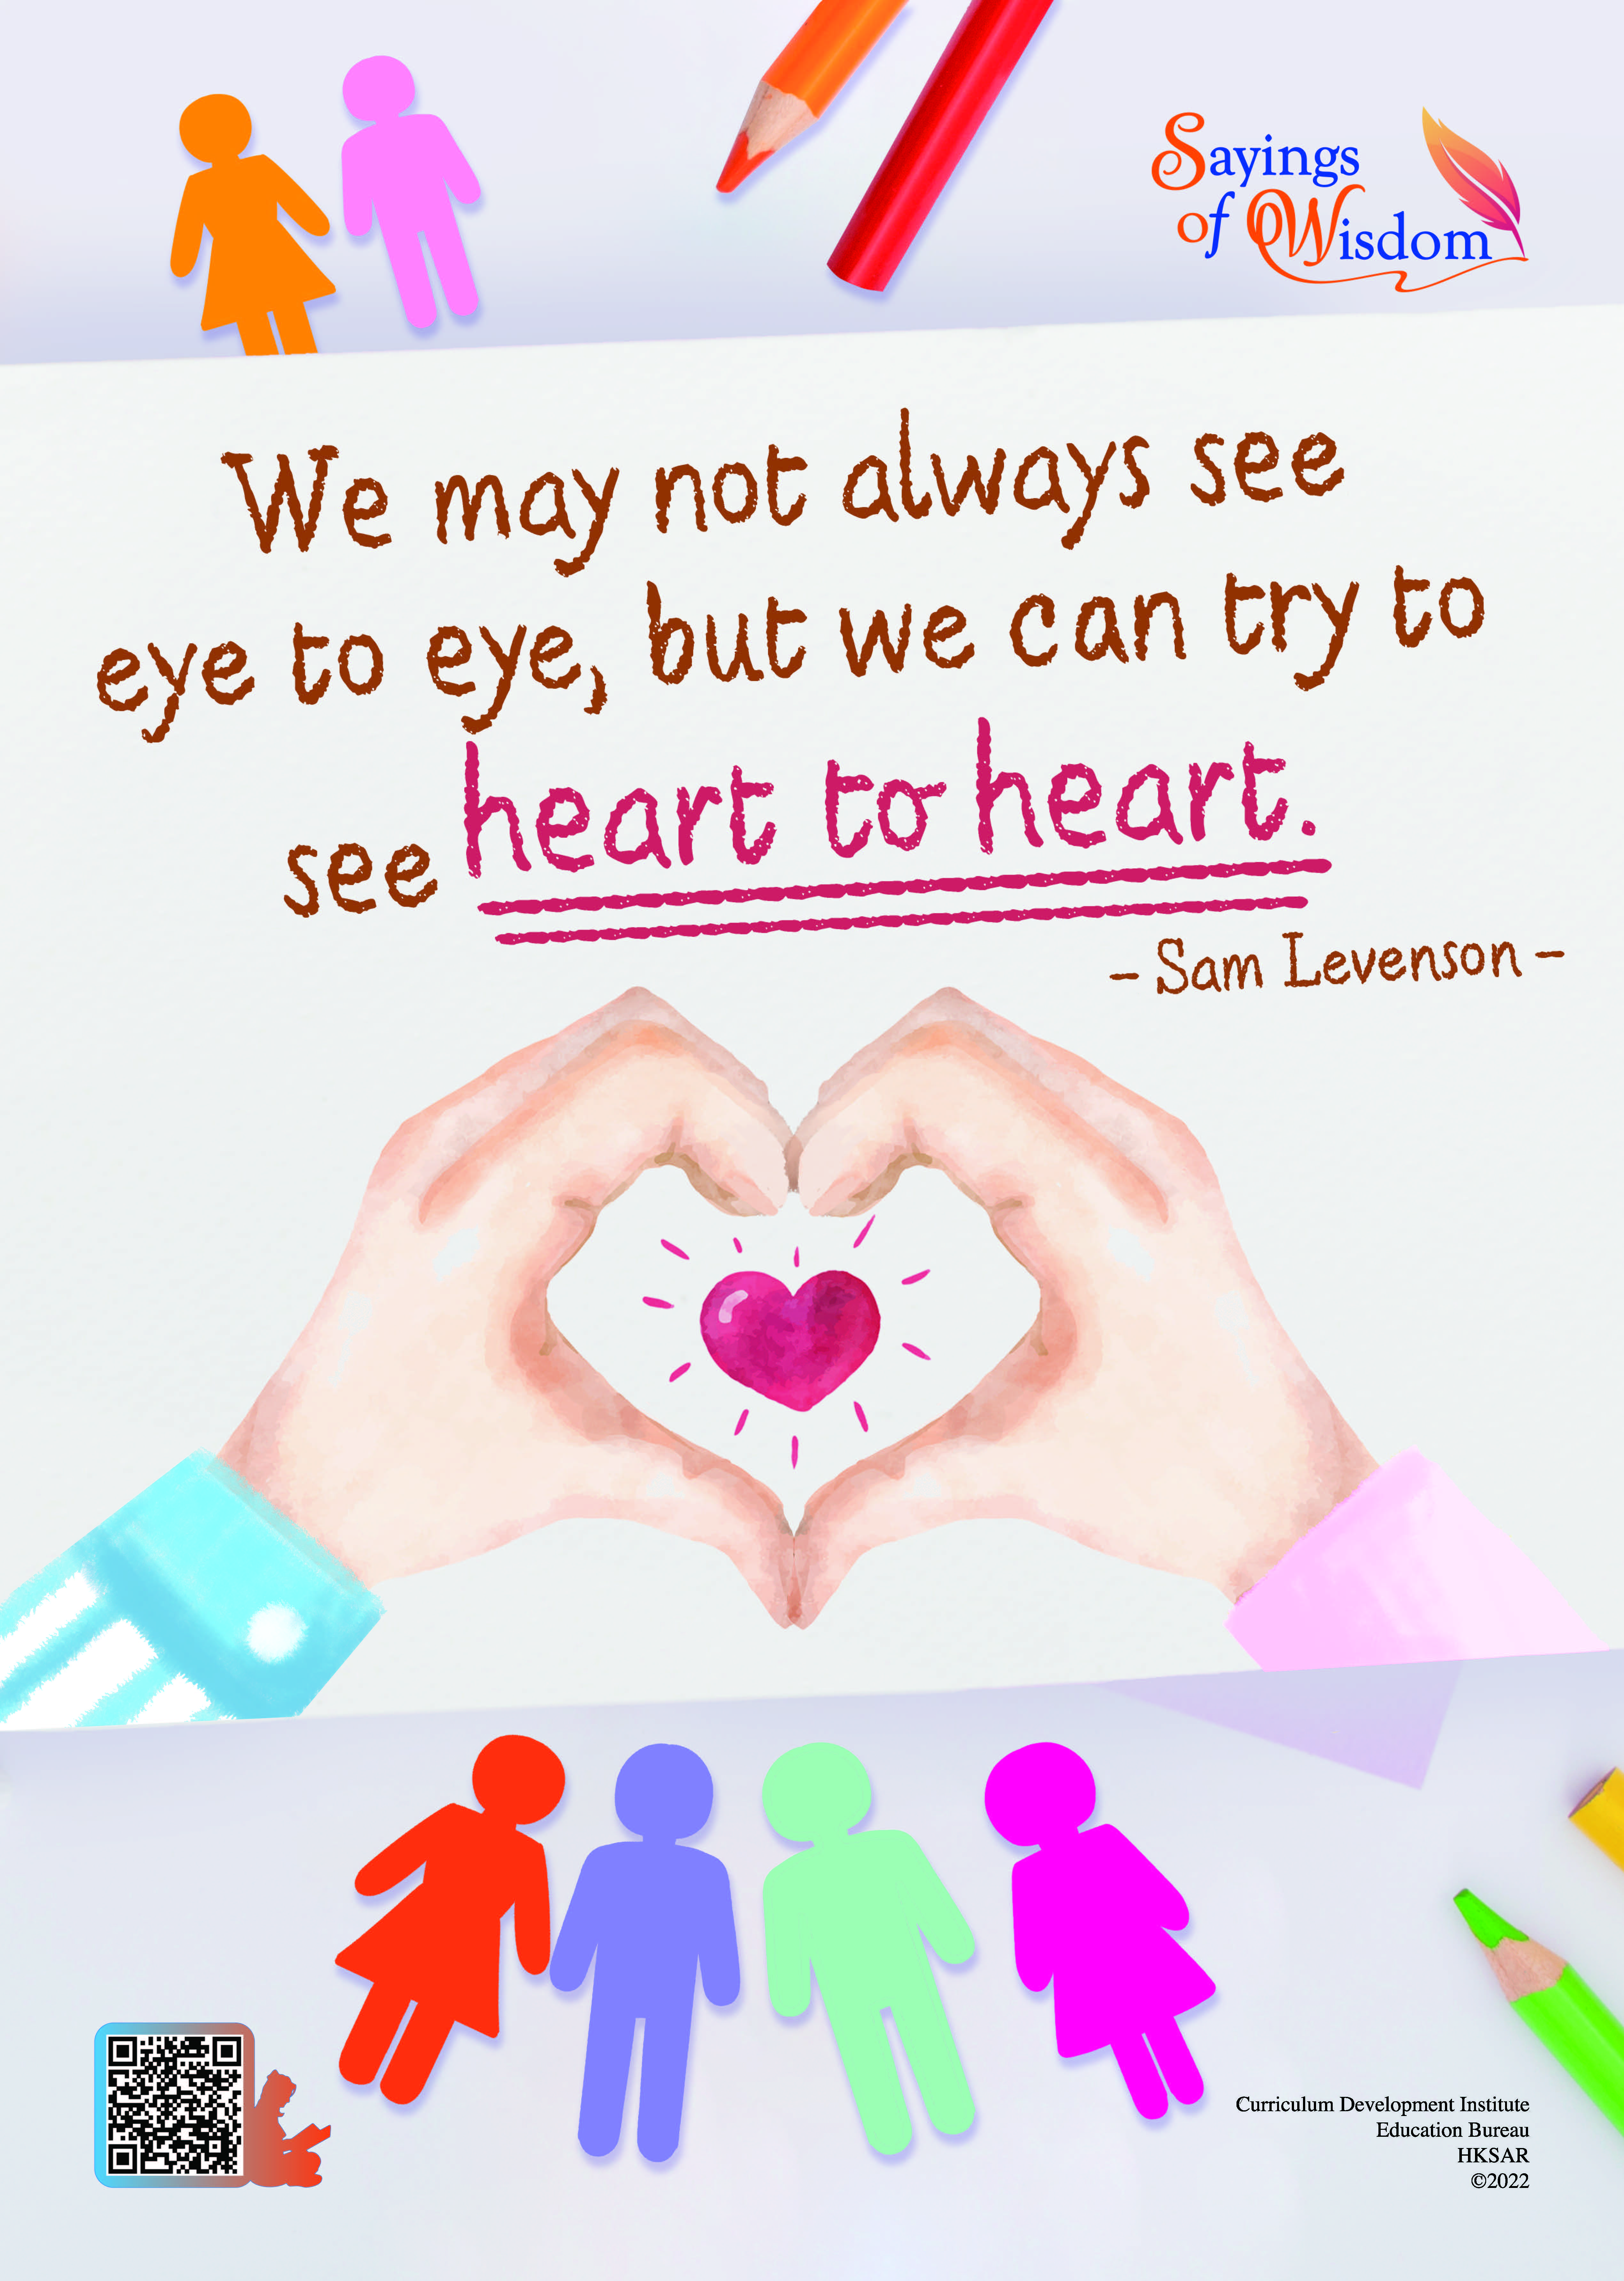 We may not always see eye to eye, but we can try to see heart to heart.